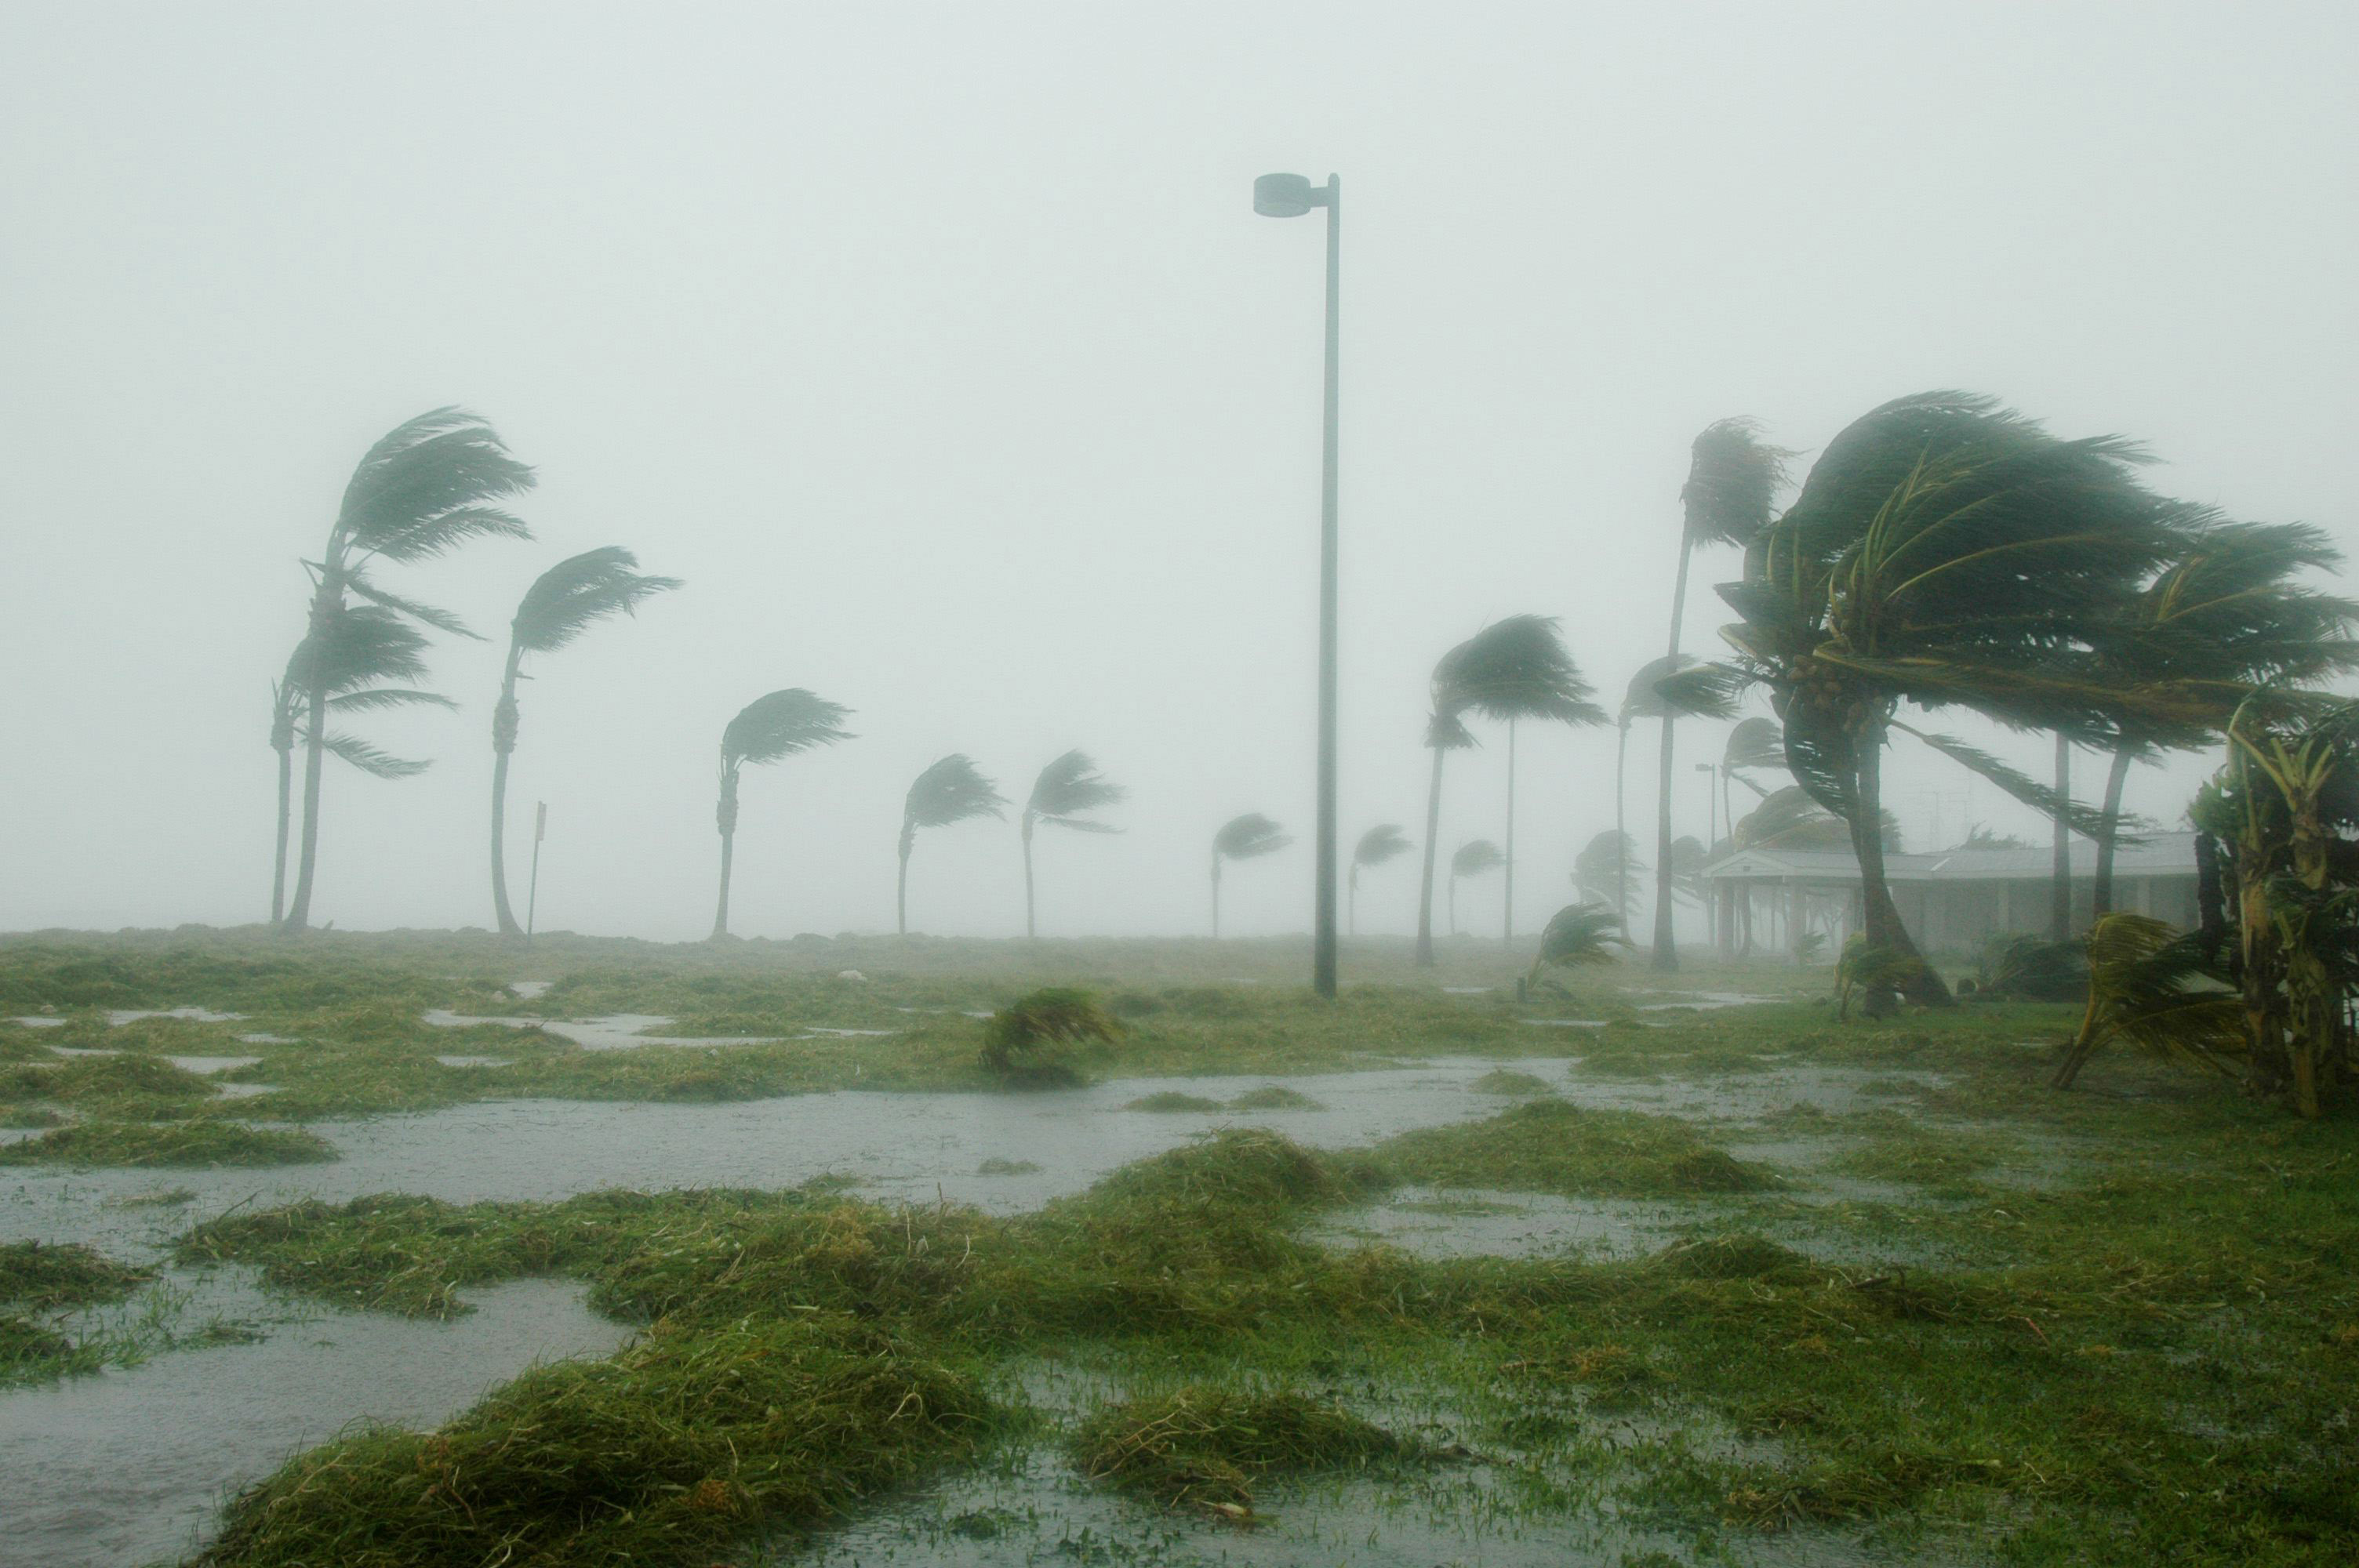 Prepare for an oncoming hurricane with this article